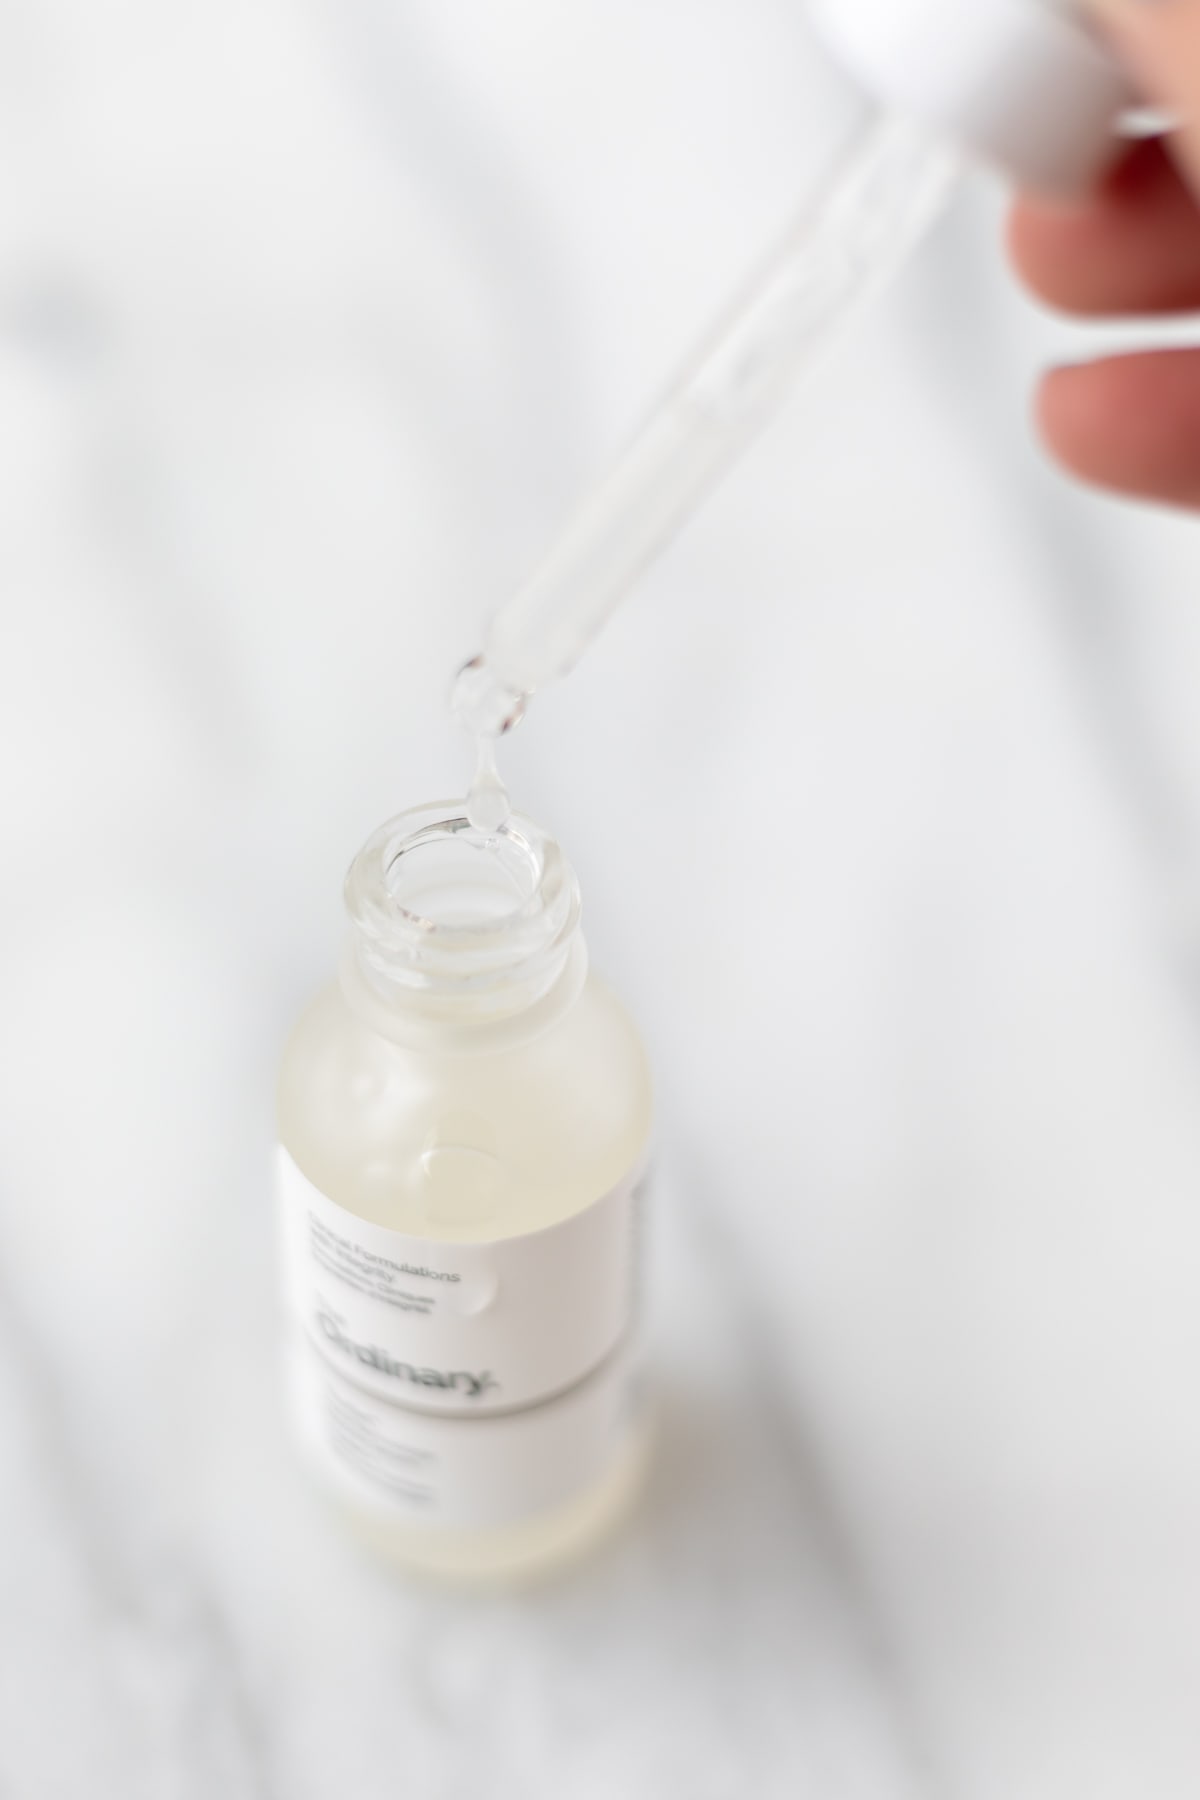 A dropper with a drop of liquid being held over a The Ordinary Multi-Peptide serum bottle.